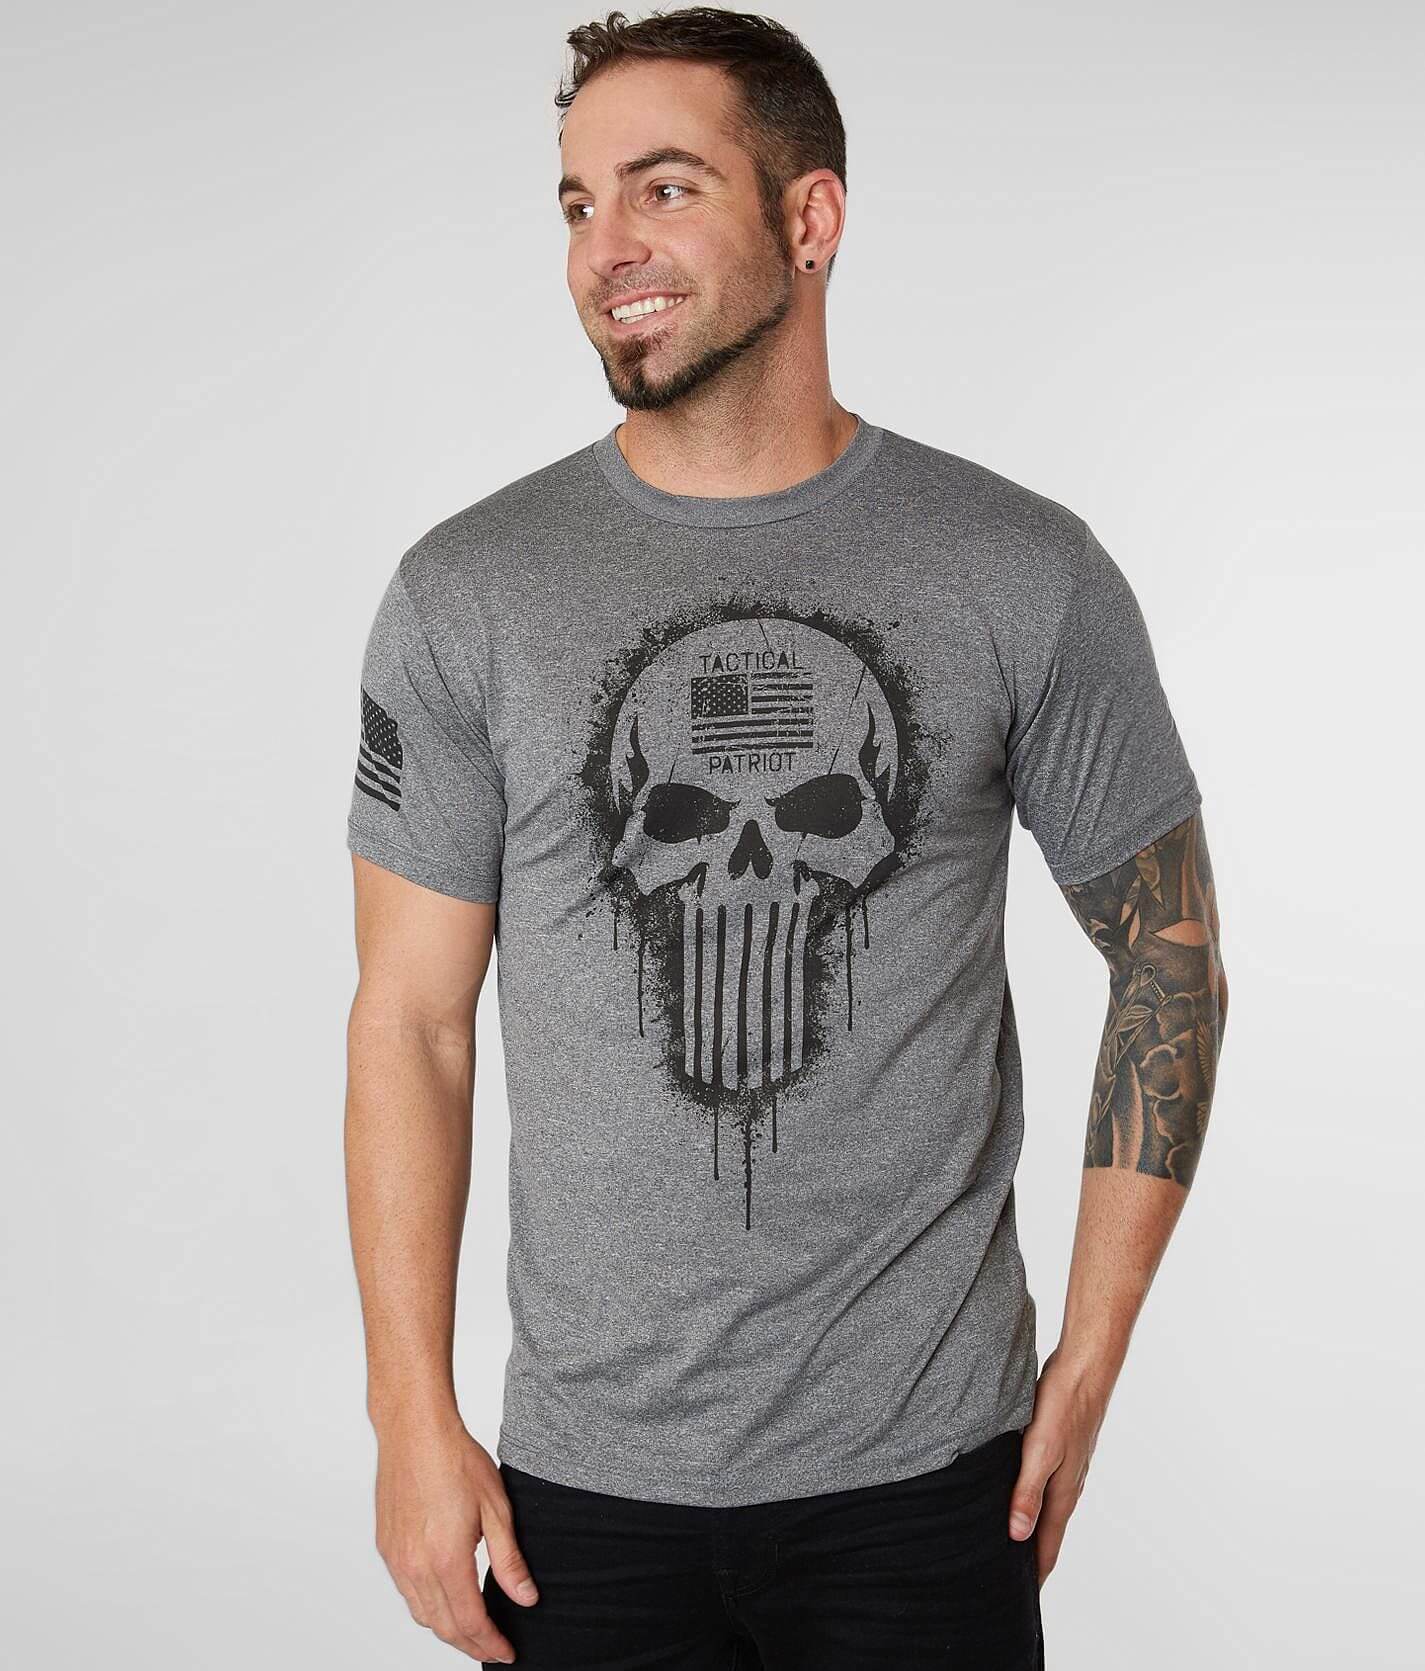 cache had Medicin Howitzer Tactical Patriot T-Shirt - Men's T-Shirts in Charcoal | Buckle